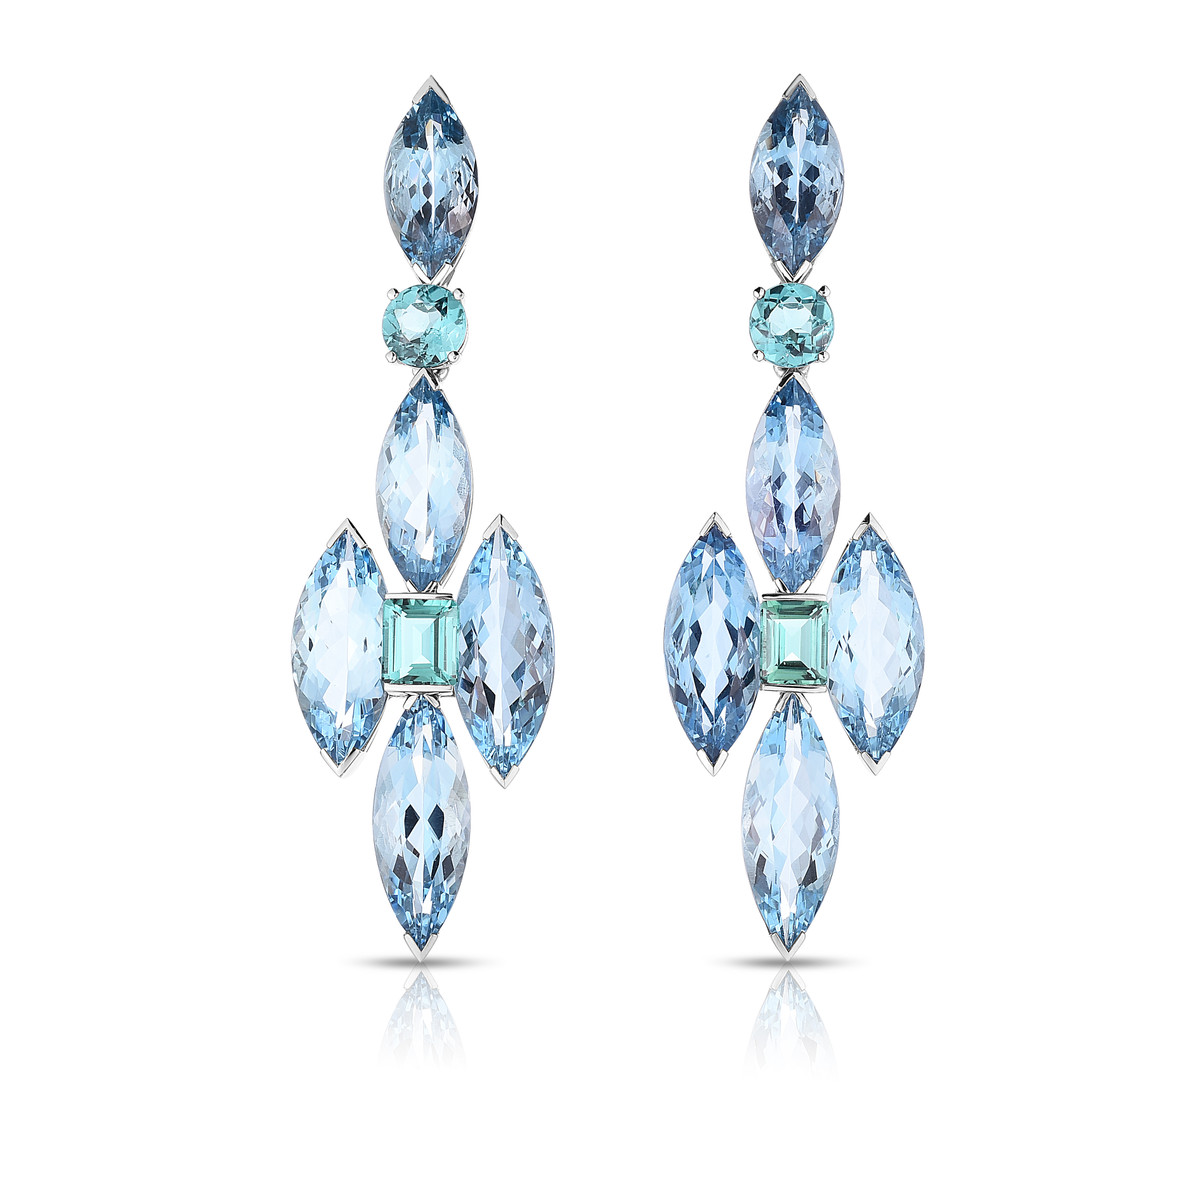 Hyde Park Collection Platinum Aquamarine and Tourmaline Earrings-46956 Product Image